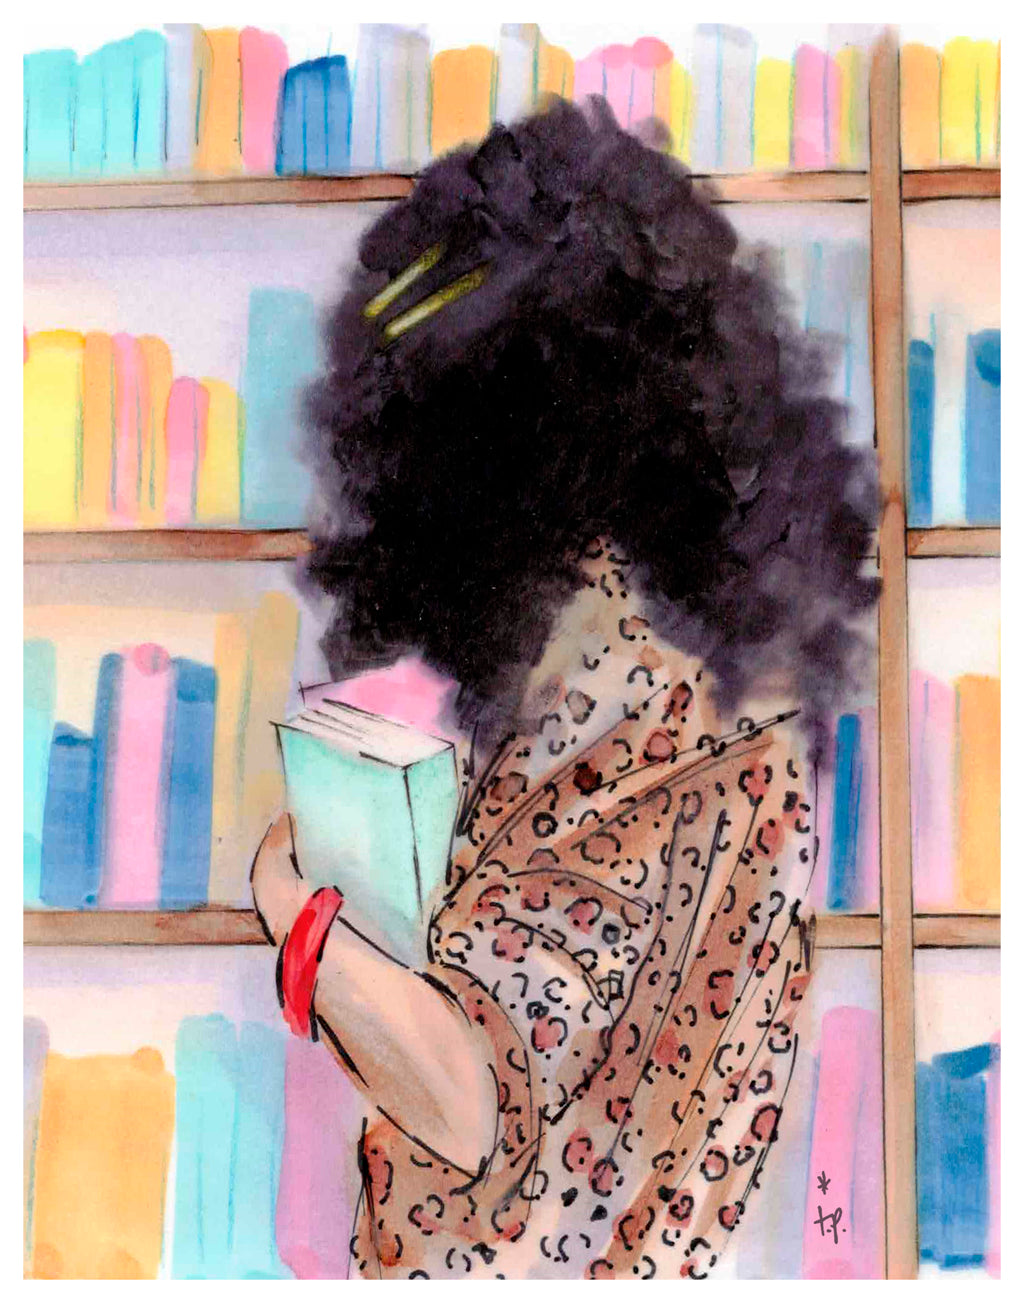 Illustration of a young woman at a library looking at a bookshelf full of books by Tatiana Poblah